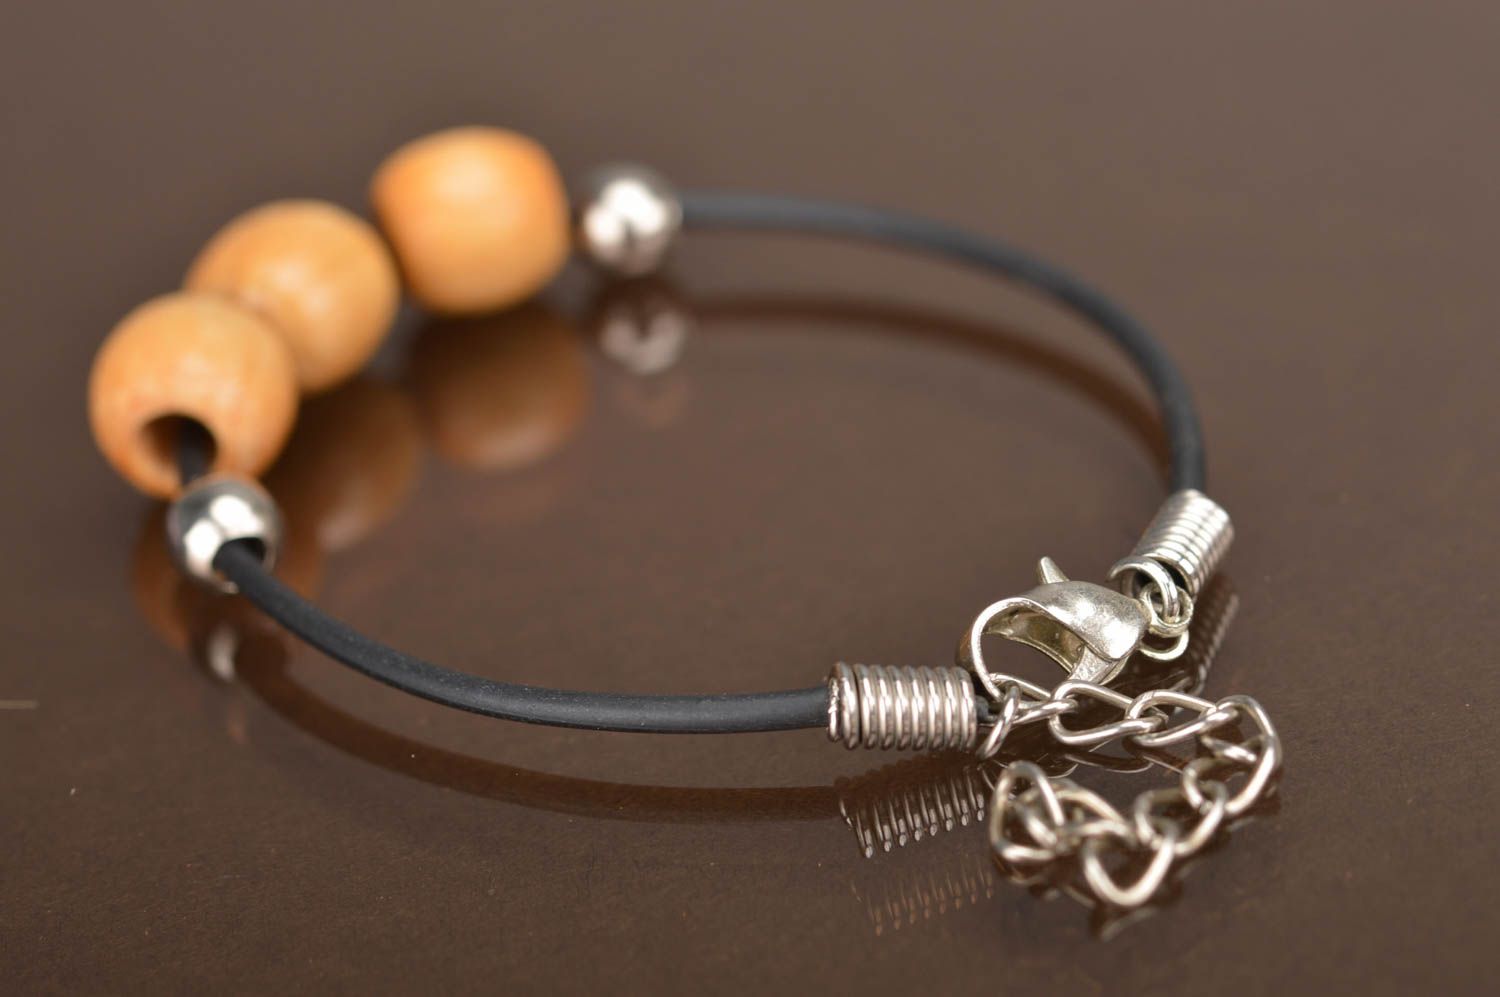 Handmade laconic simple rubber cord wrist bracelet with light wooden beads photo 5